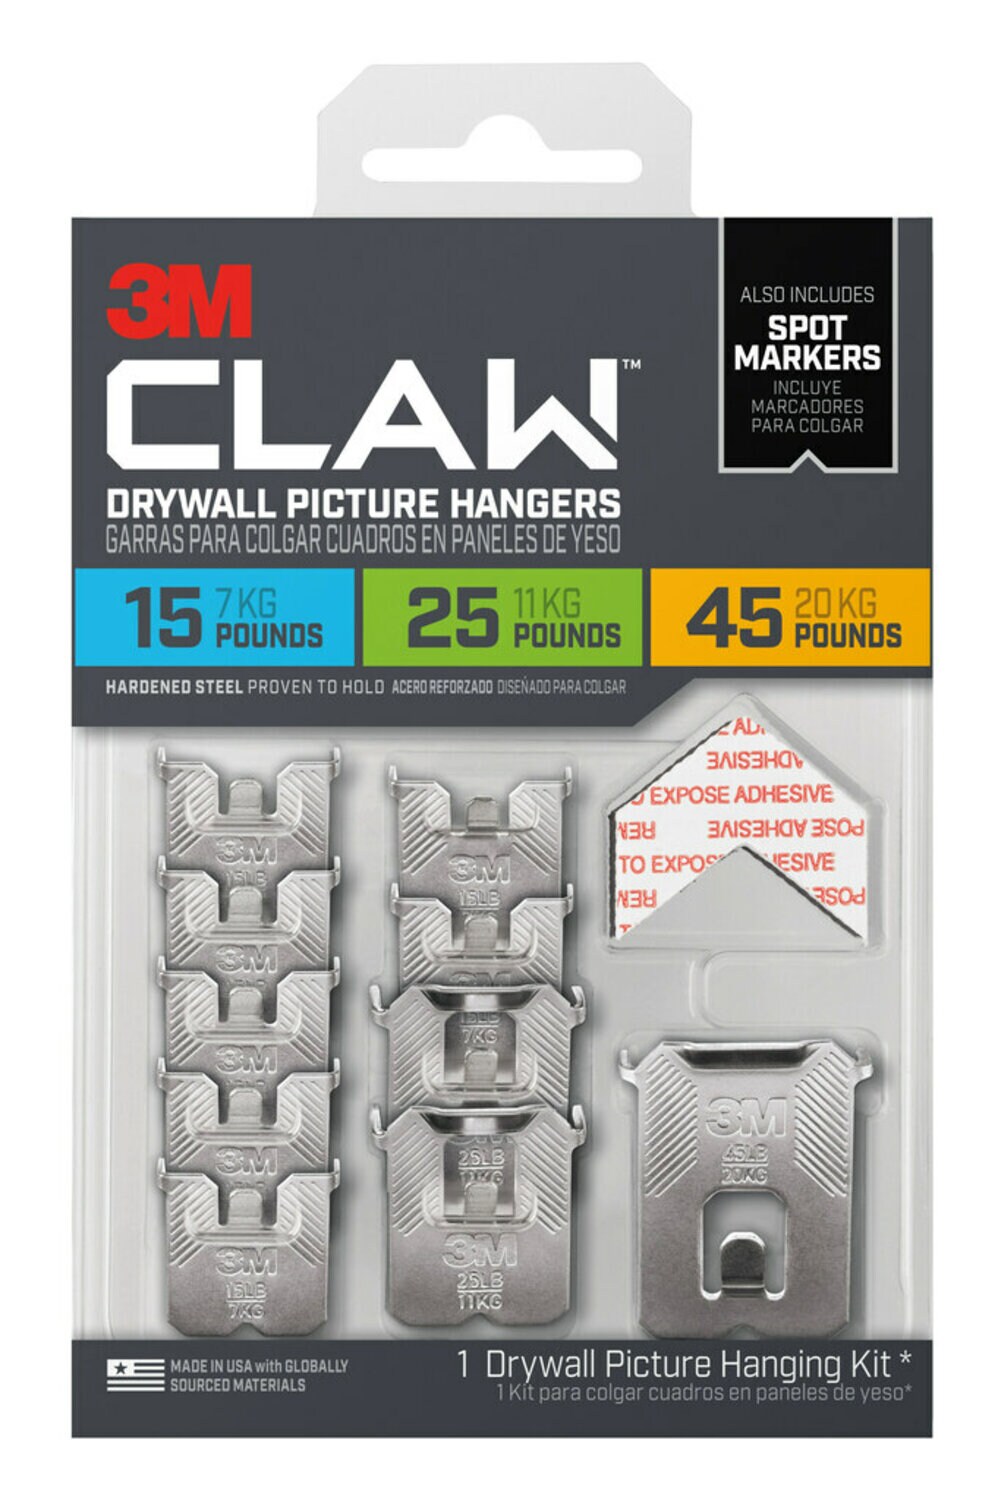 7100240931 - 3M CLAW Drywall Picture Hanger Variety Pack with Spot Markers 3PHKITM-10ES